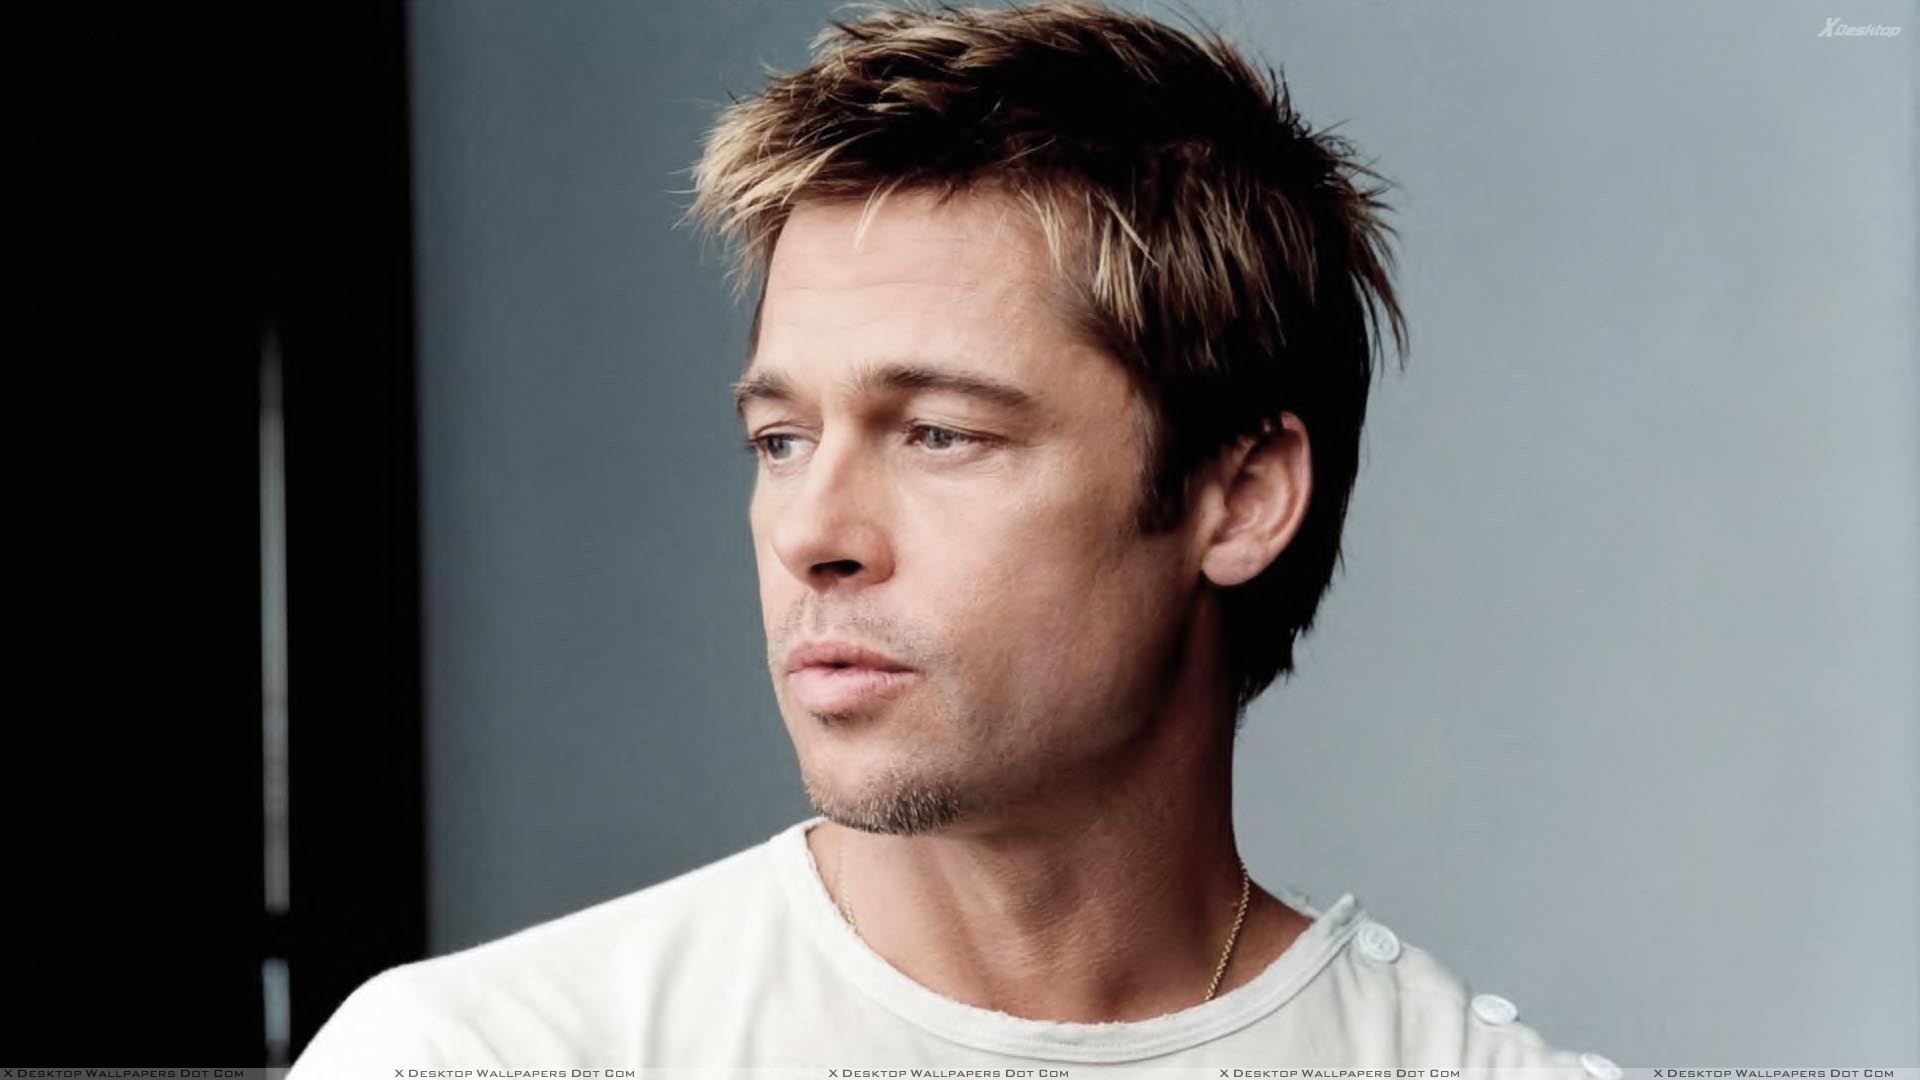 1920x1080 You are viewing wallpaper titled "Brad Pitt ...